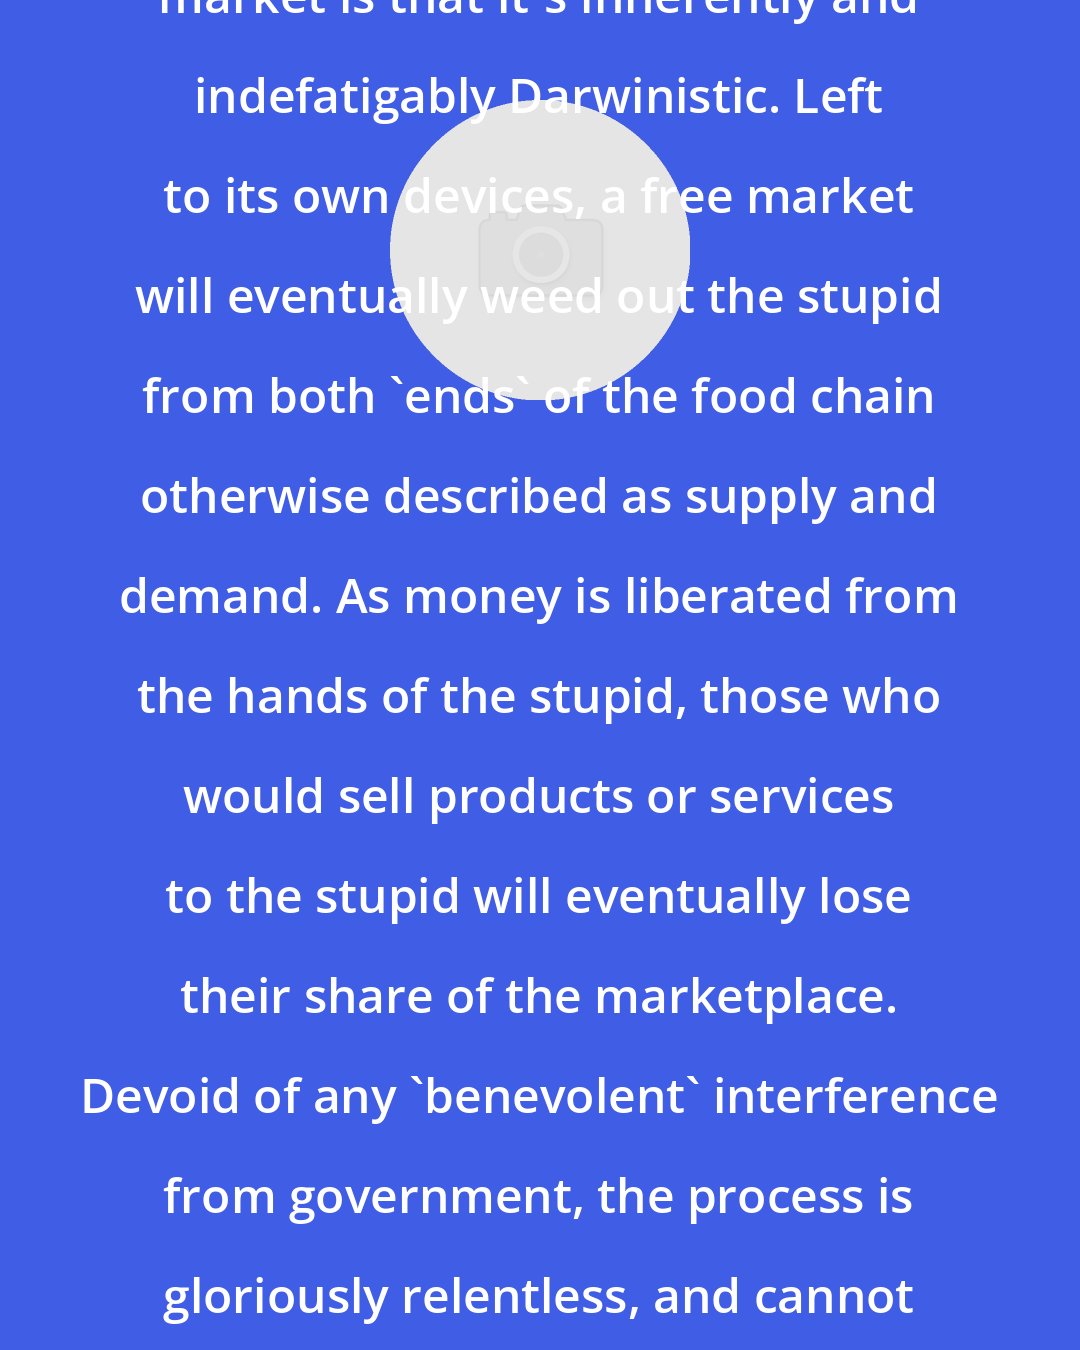 Edward Britton: One of the great things about a free market is that it's inherently and indefatigably Darwinistic. Left to its own devices, a free market will eventually weed out the stupid from both 'ends' of the food chain otherwise described as supply and demand. As money is liberated from the hands of the stupid, those who would sell products or services to the stupid will eventually lose their share of the marketplace. Devoid of any 'benevolent' interference from government, the process is gloriously relentless, and cannot help but yield a successively smarter class of participants.